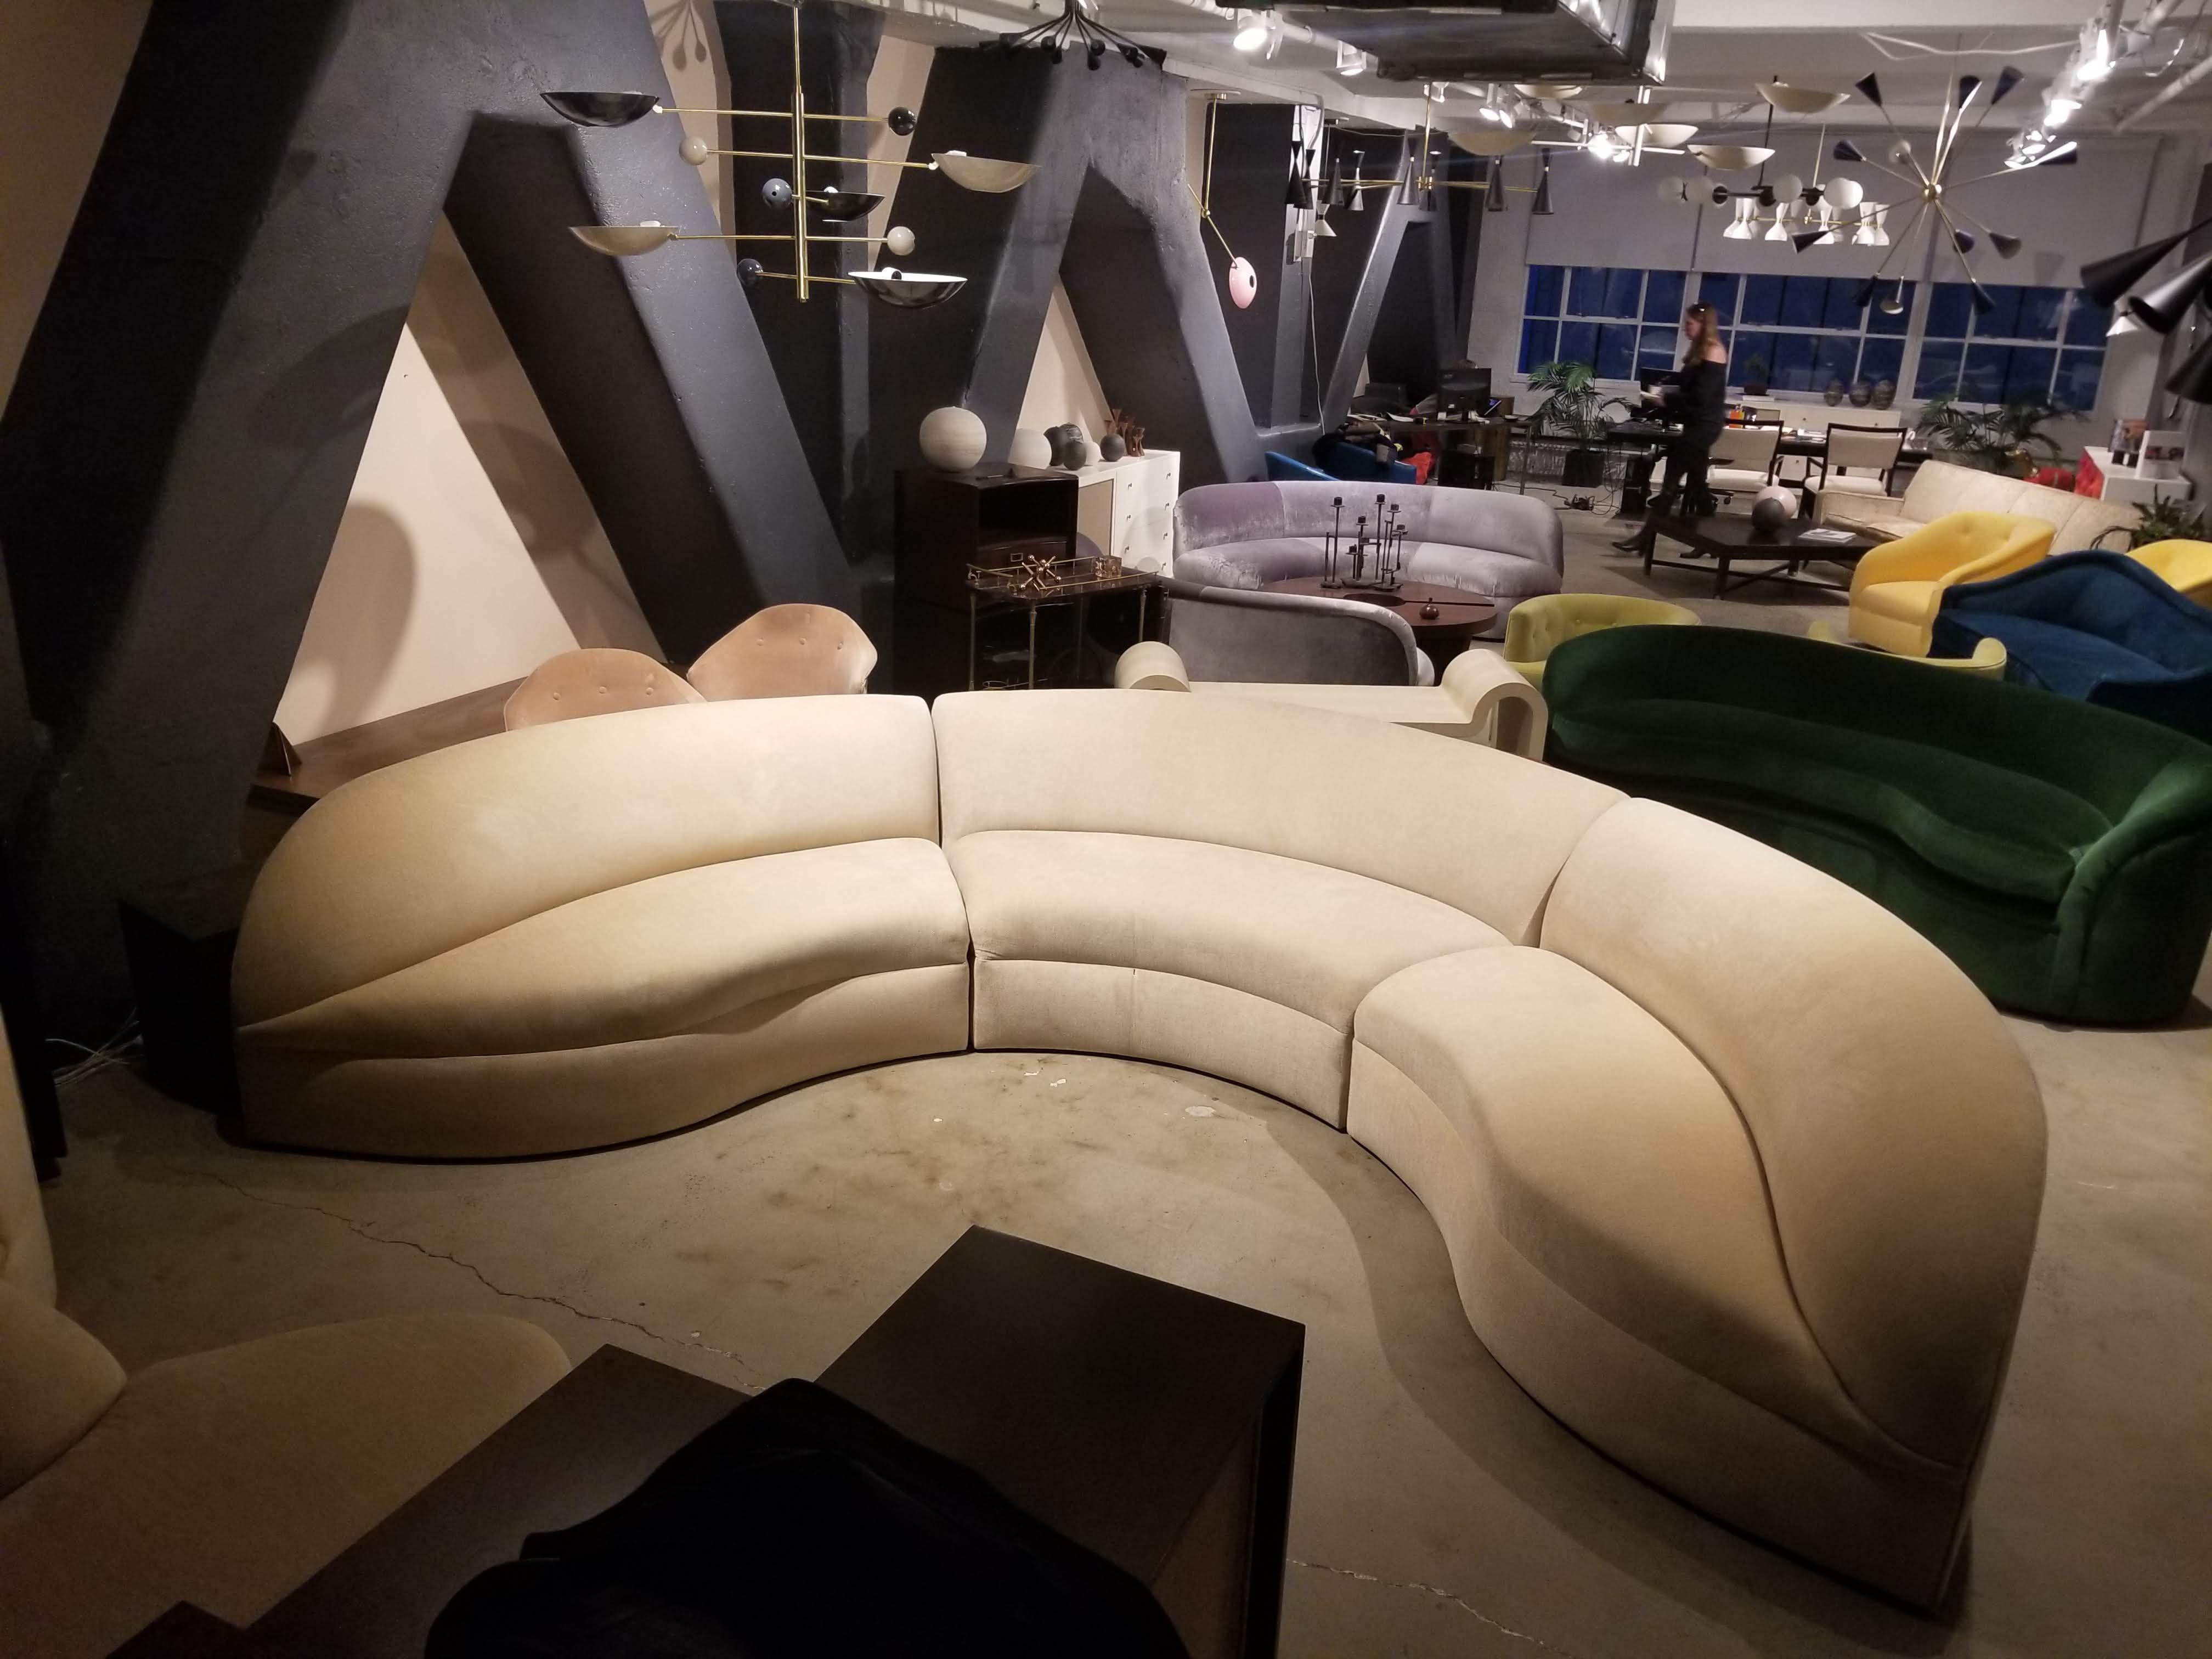 Massive 1980s to early 1990s curved biomorphic sectional sofa in cream wool. This sofa is outrageously comfortable and inviting, yet sleek and sculptural, it is always so difficult to find the perfect marriage of comfort and beauty in sofas.